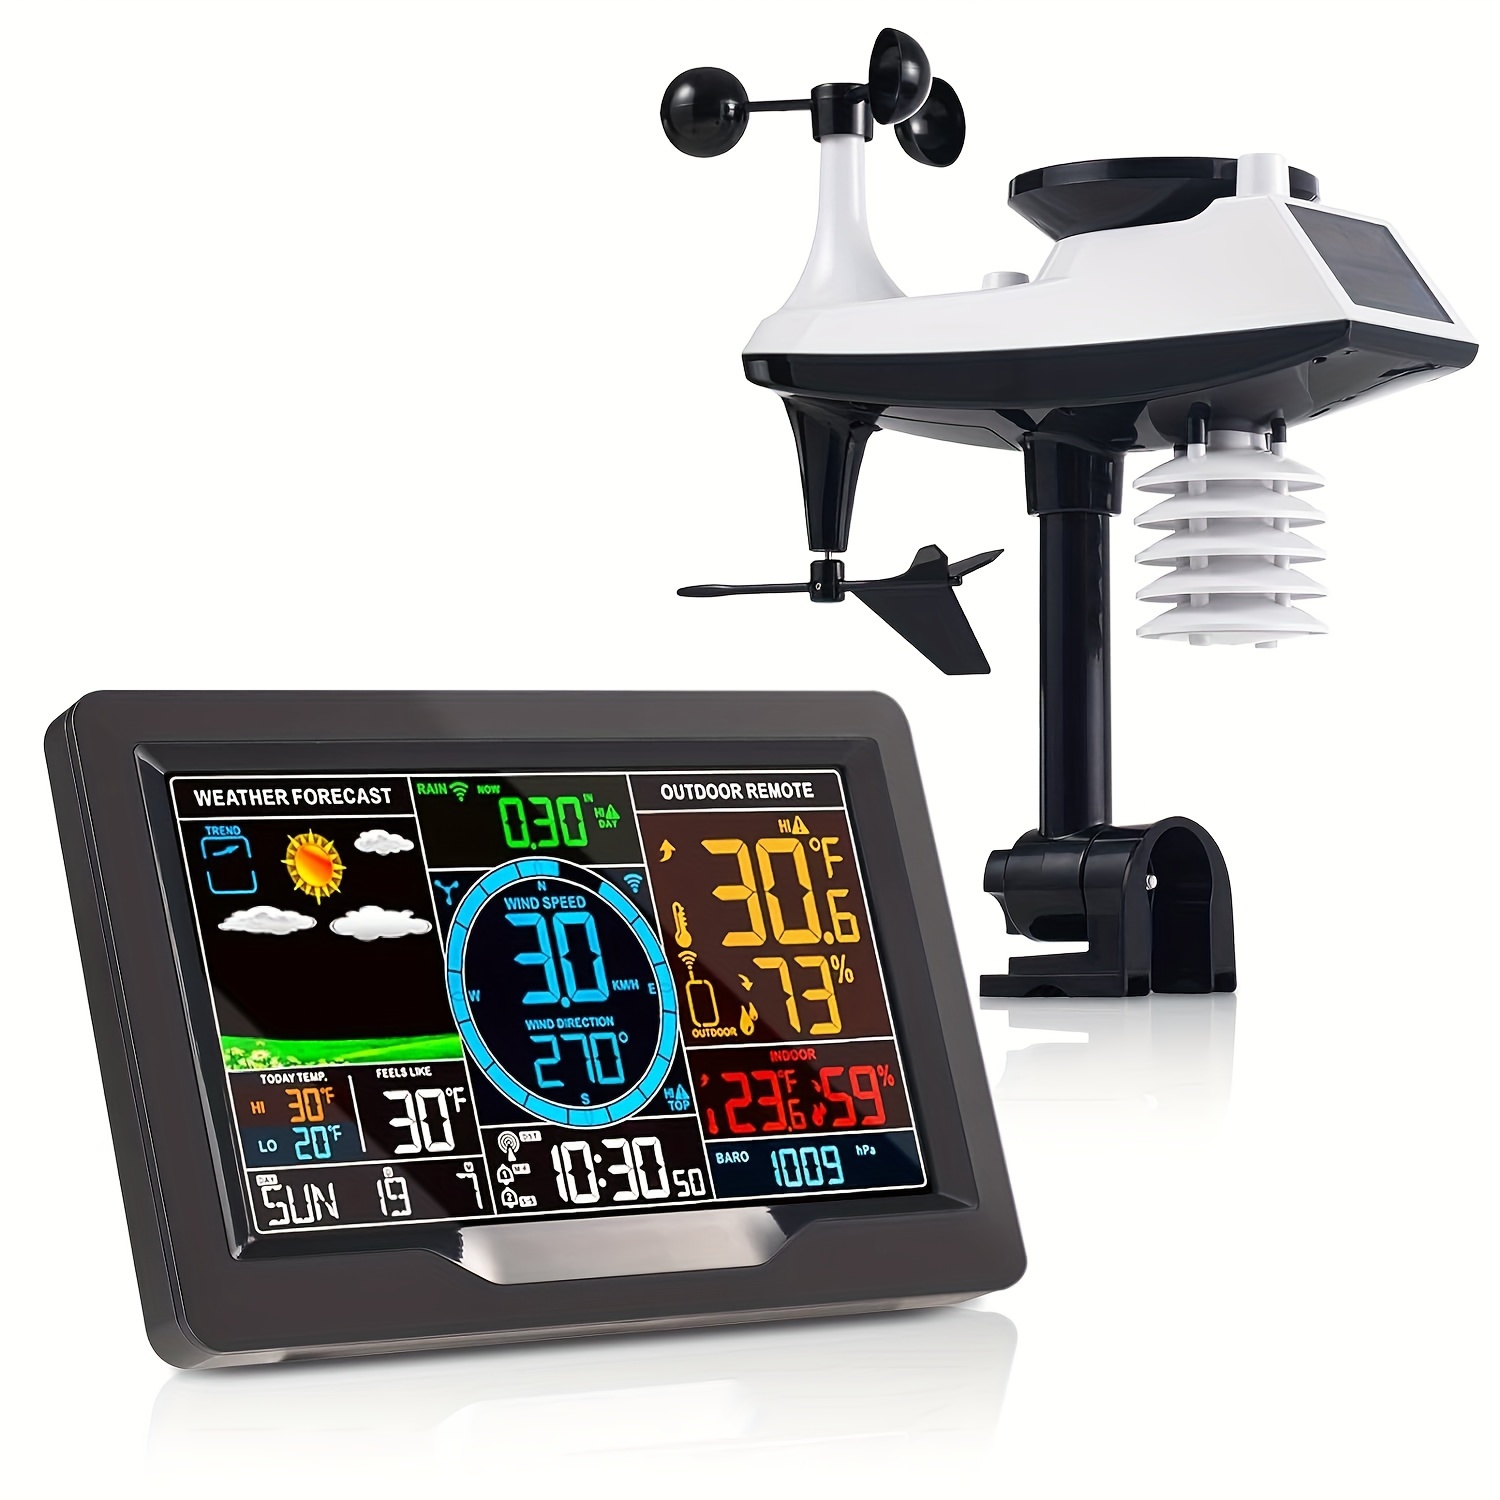 

adult-friendly" Wireless Weather Station 3390 With Digital Display - Wind Speed, Rain Gauge, Direction, Forecast, Temperature & Humidity Monitor For Home Use